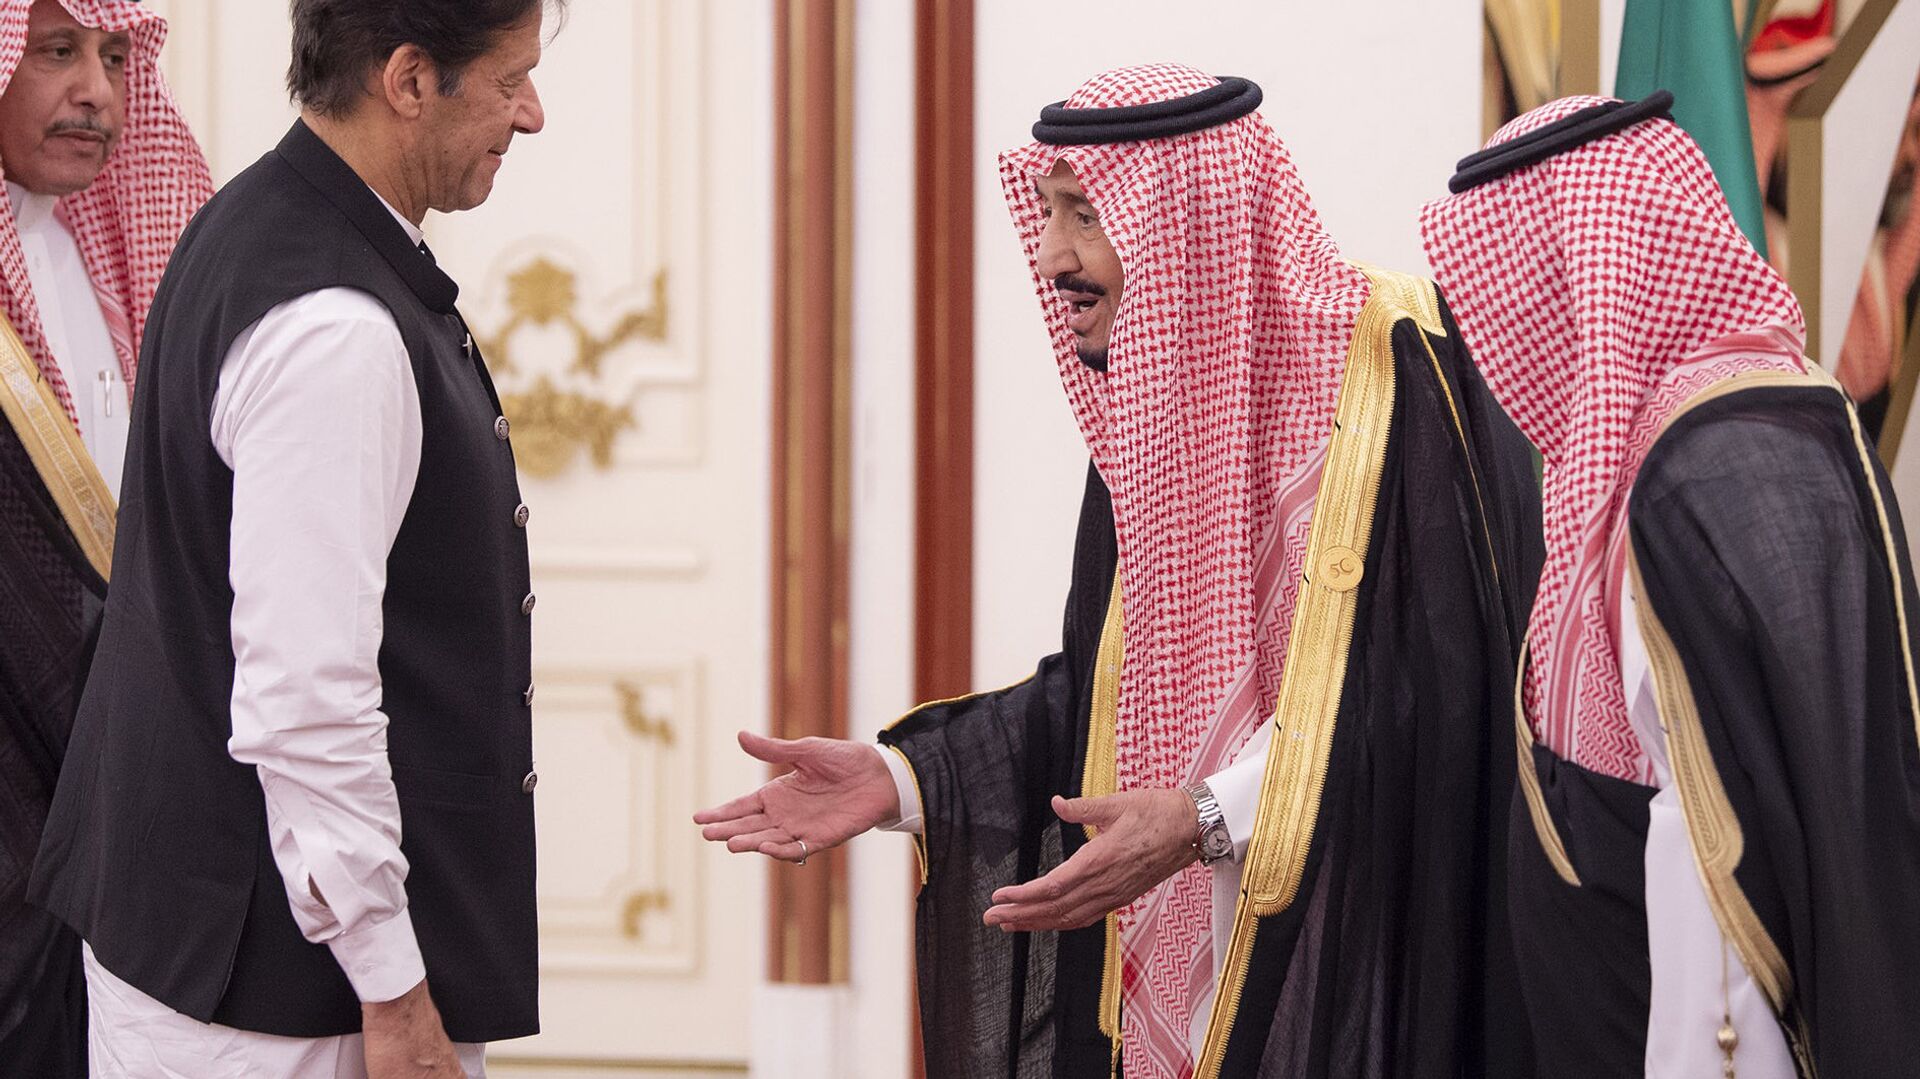 This handout photo released by the Saudi Royal Palace shows King Salman bin Abdulaziz (C) of Saudi Arabia welcoming Pakistani Prime Minister Imran Khan (L) at the opening session of a summit of the 57-member Organization of Islamic Cooperation (OIC) in the Saudi holy city of Mecca in the early hours of June 1, 2019 - Sputnik International, 1920, 15.02.2022